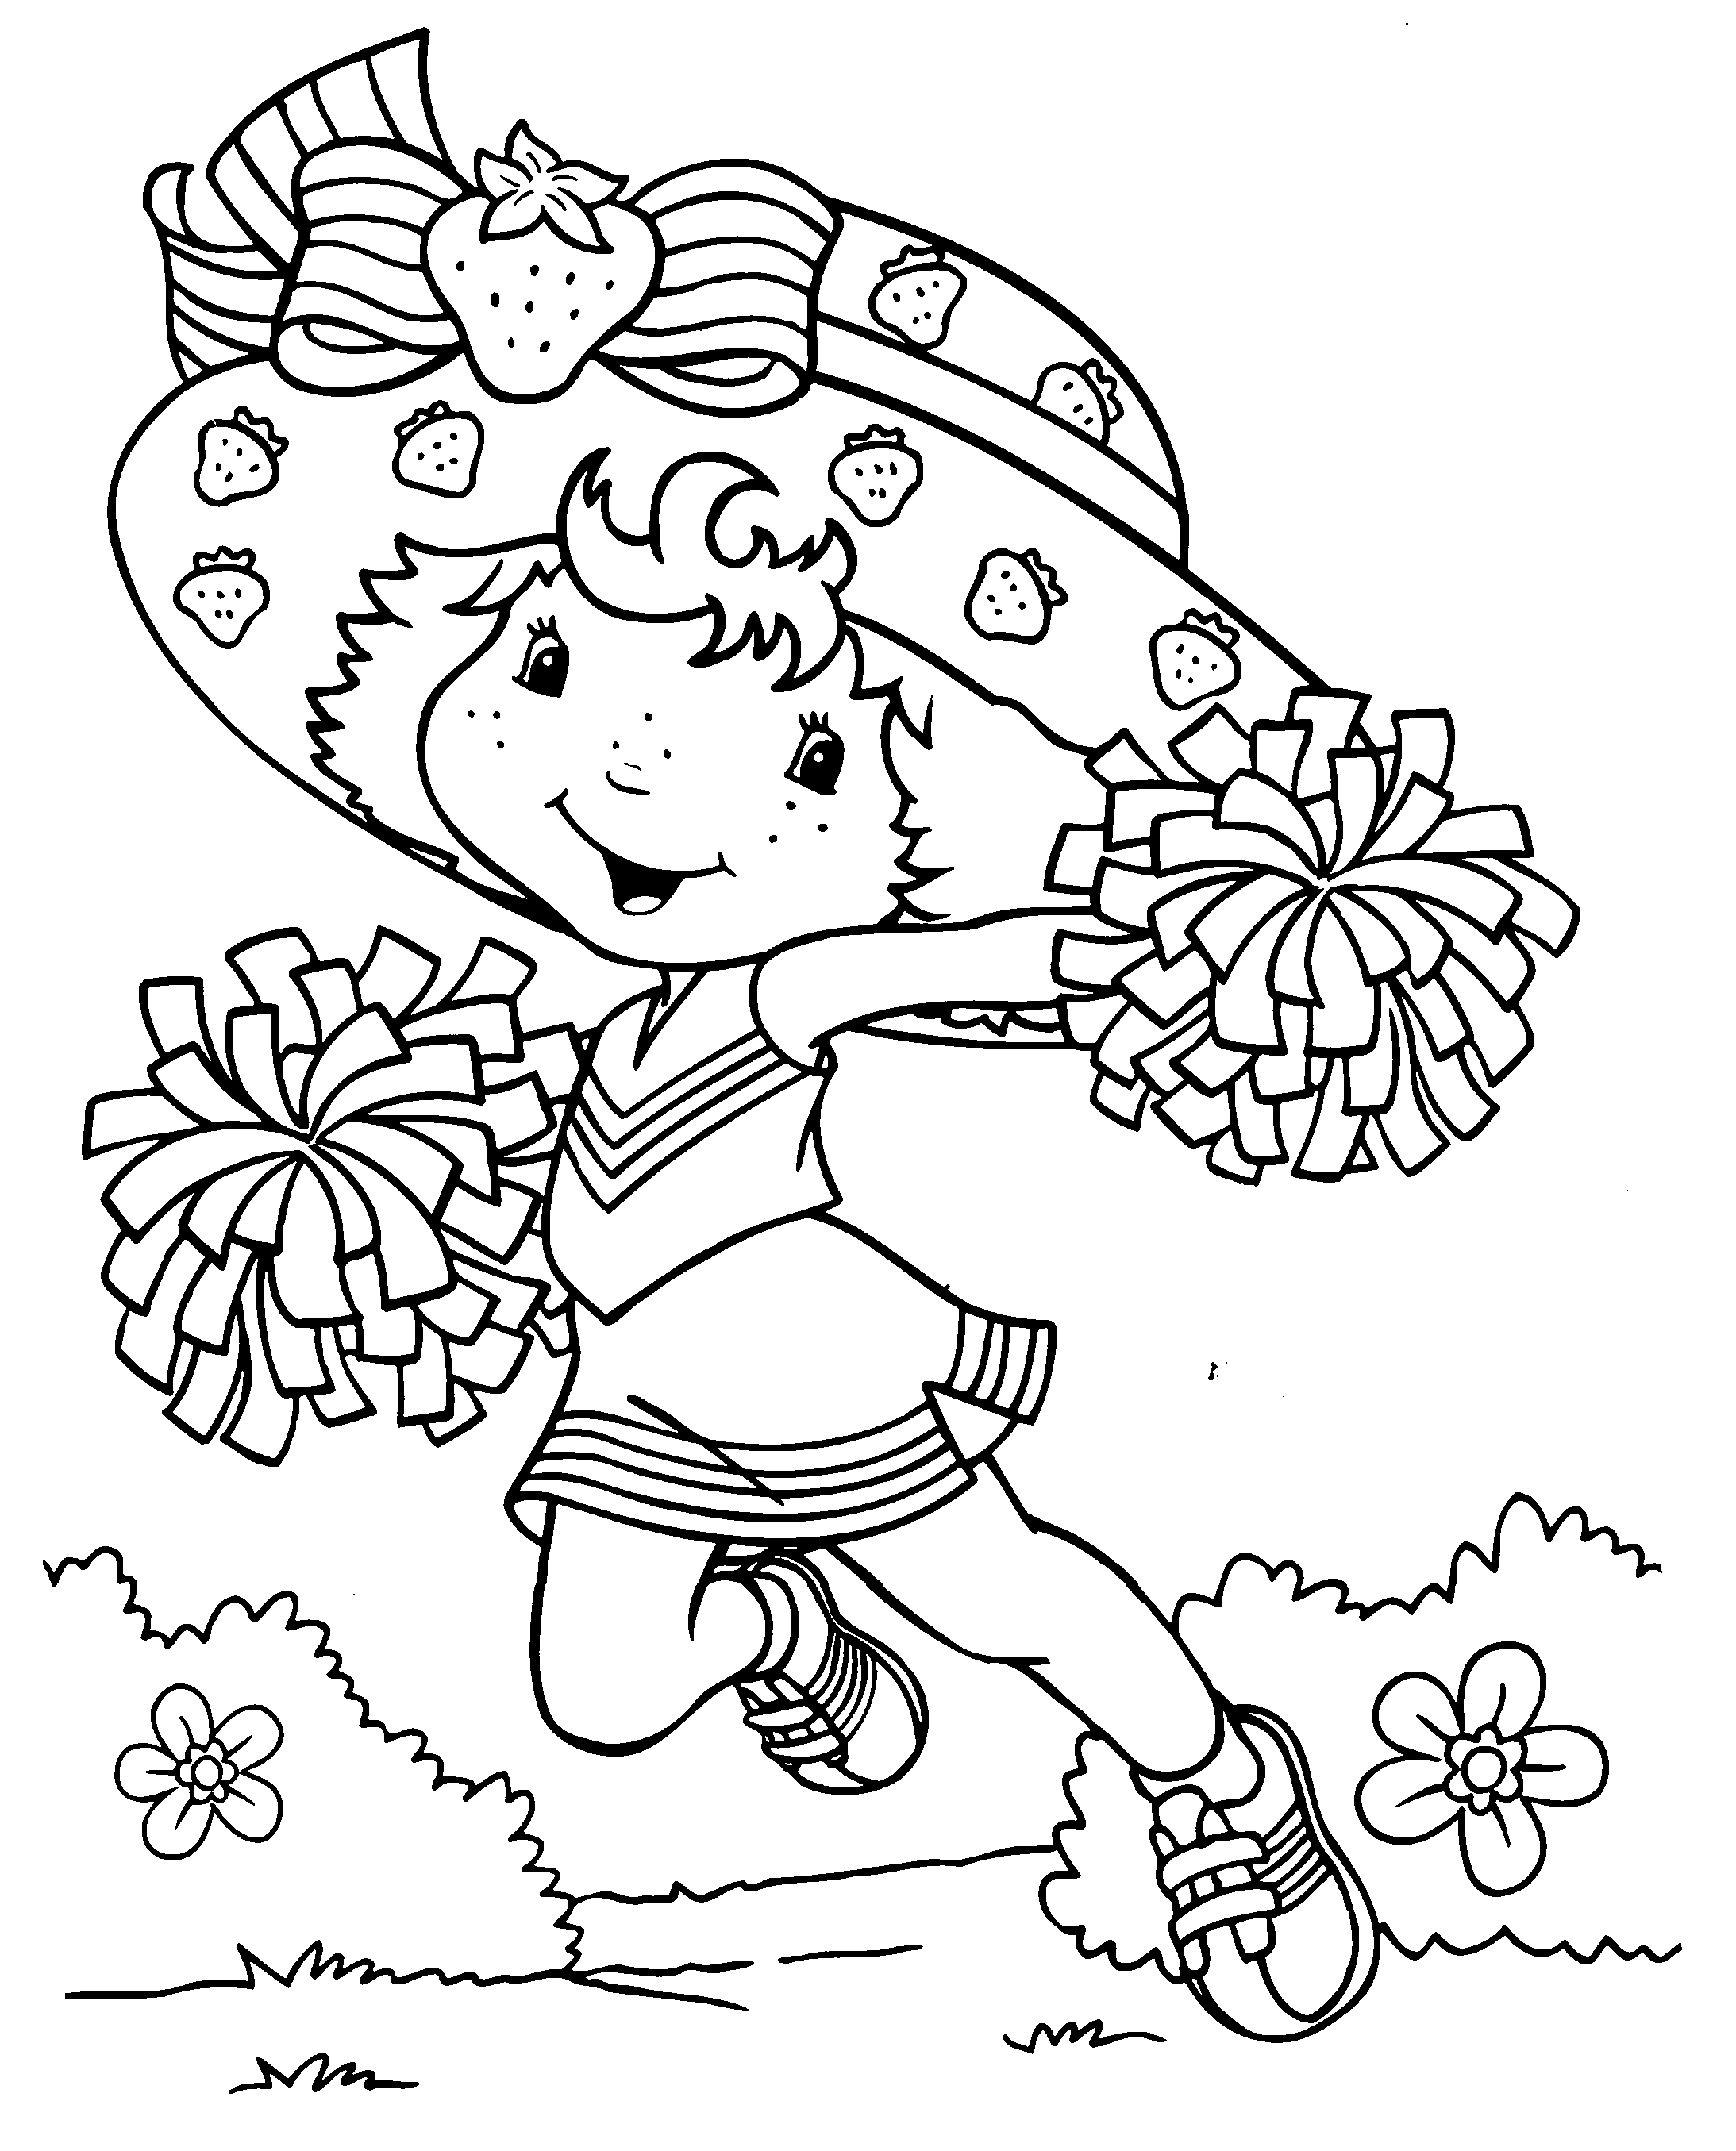 Coloring Pages for Girls   Best Coloring Pages For Kids